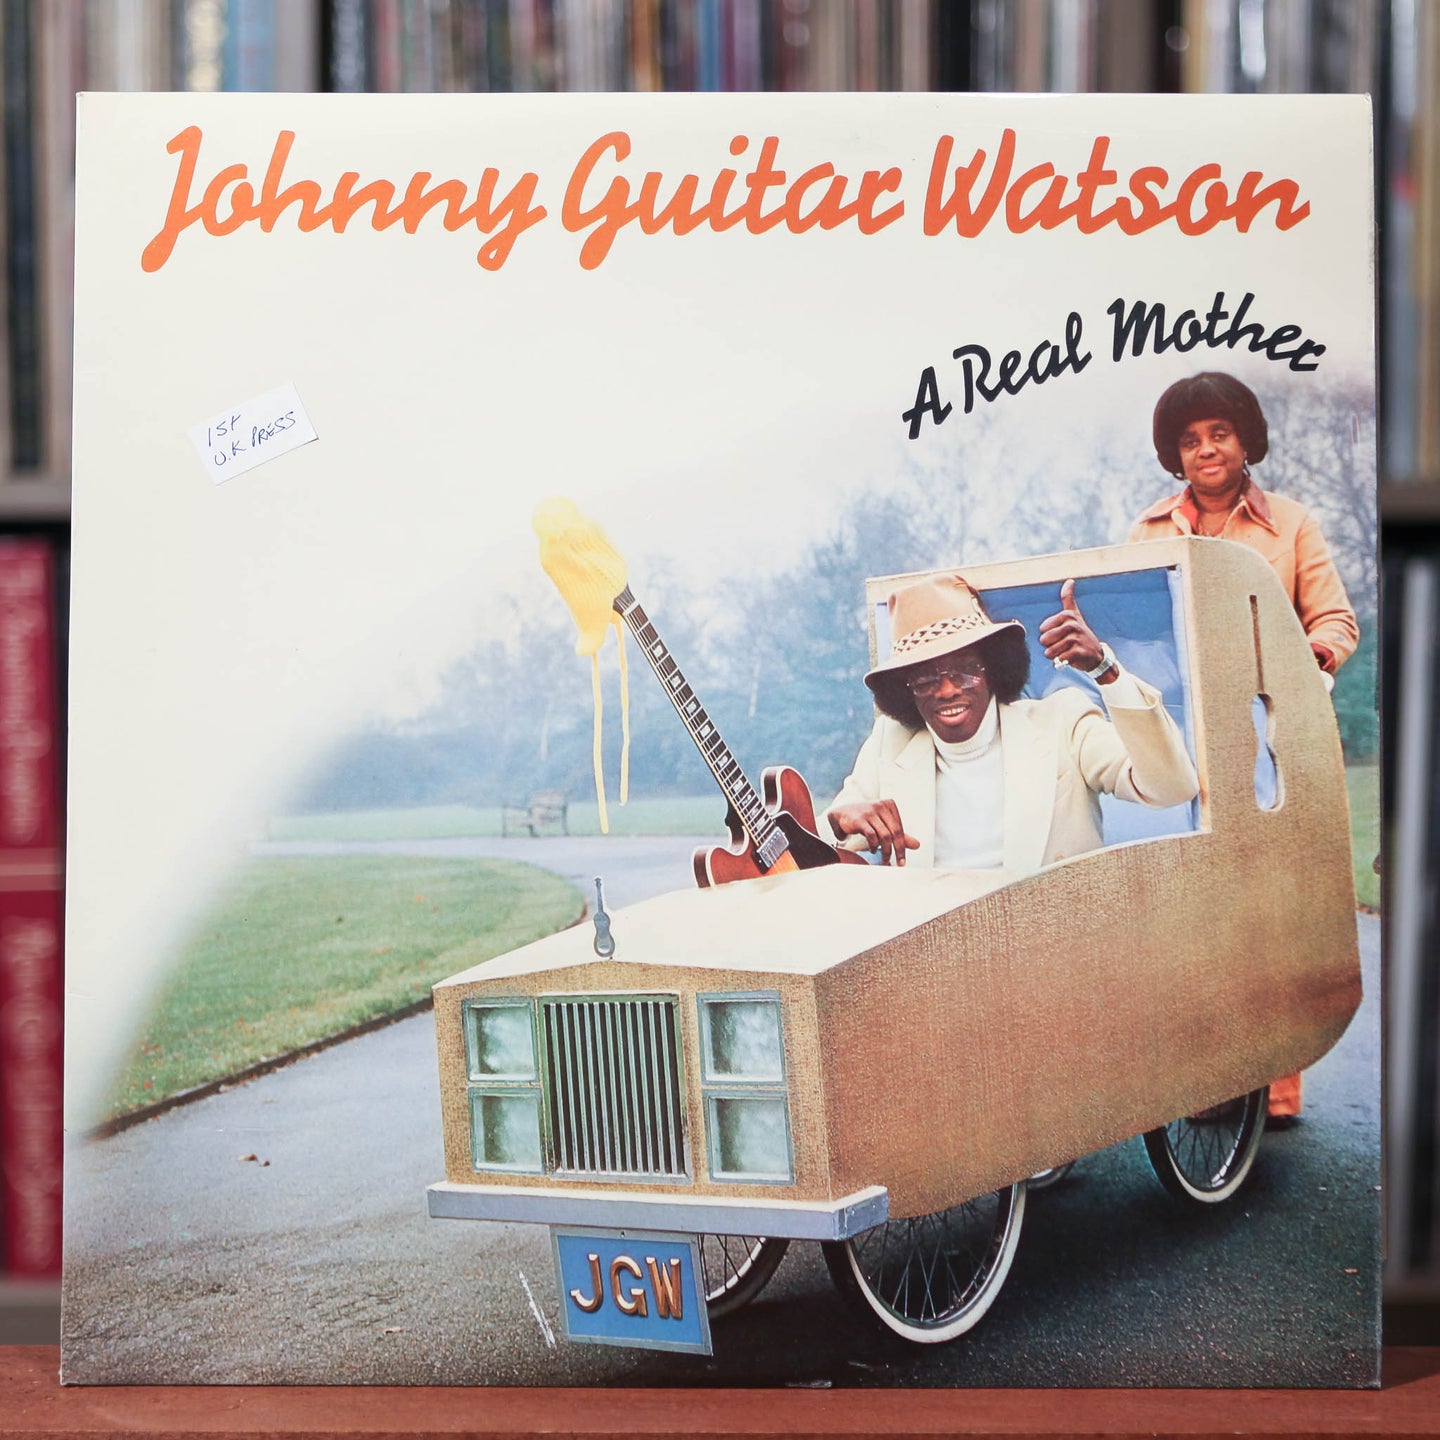 Johnny Guitar Watson - A Real Mother - UK Import - 1977 DJM Records, EX/EX